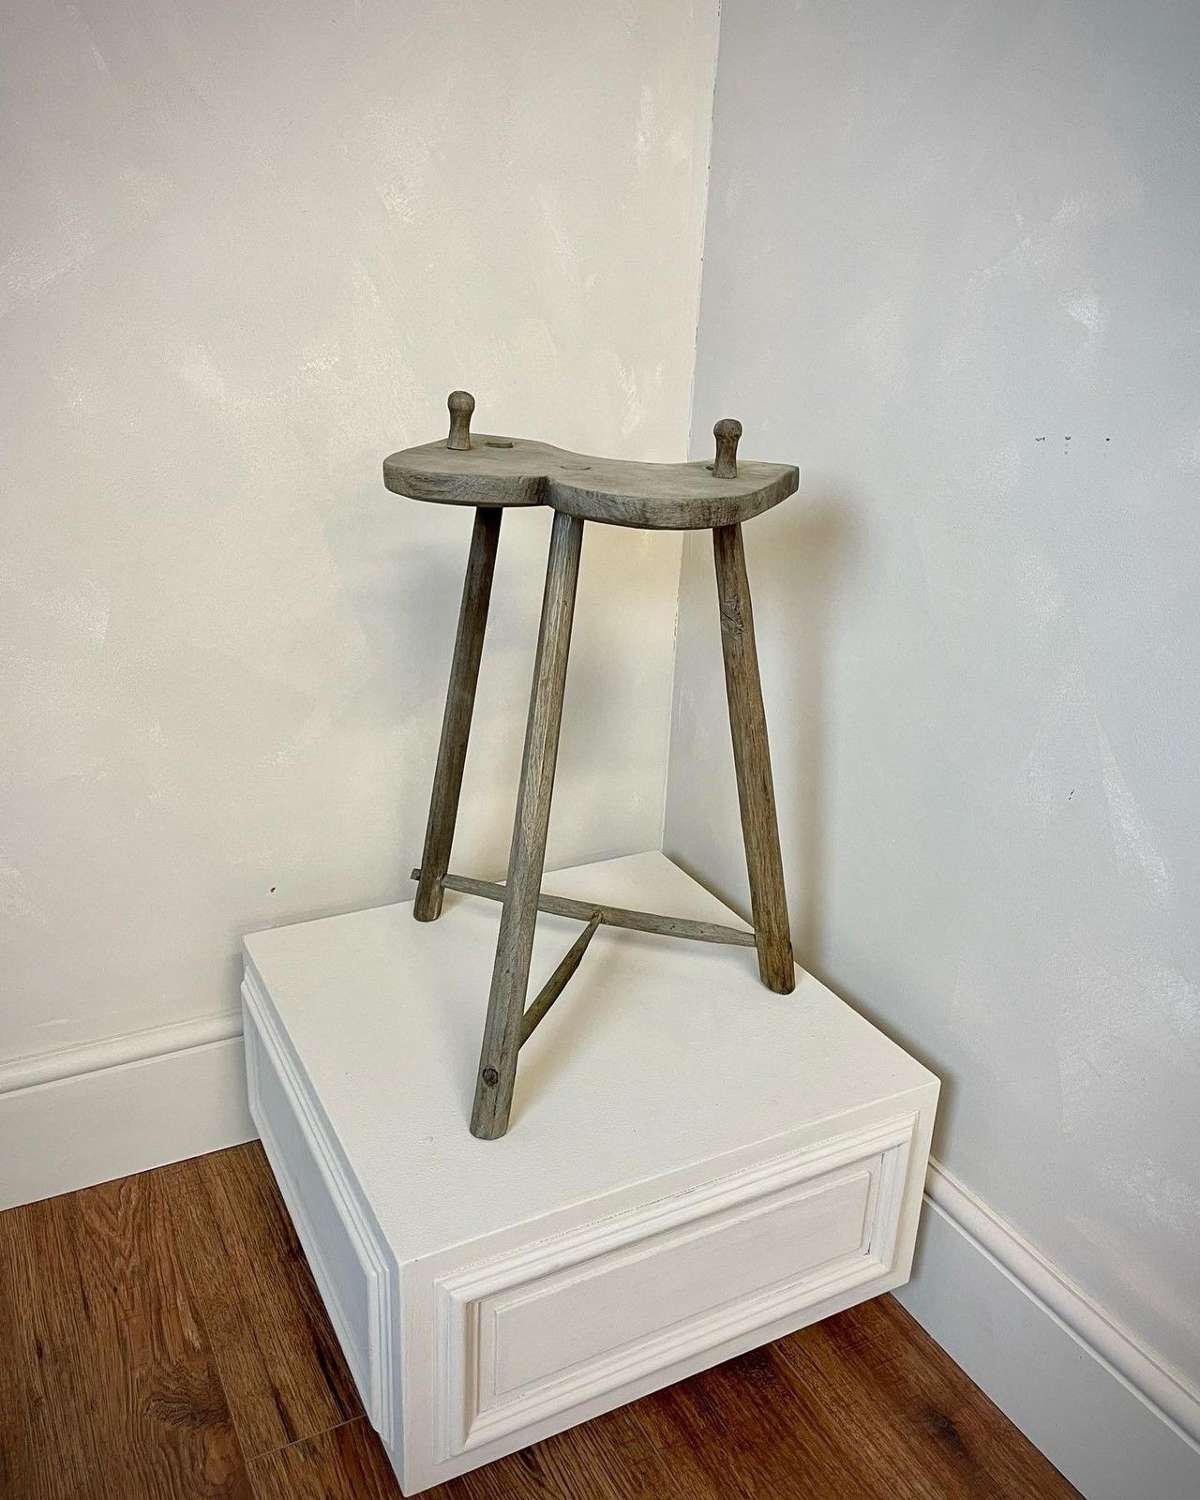 Peg jointed primtive stool